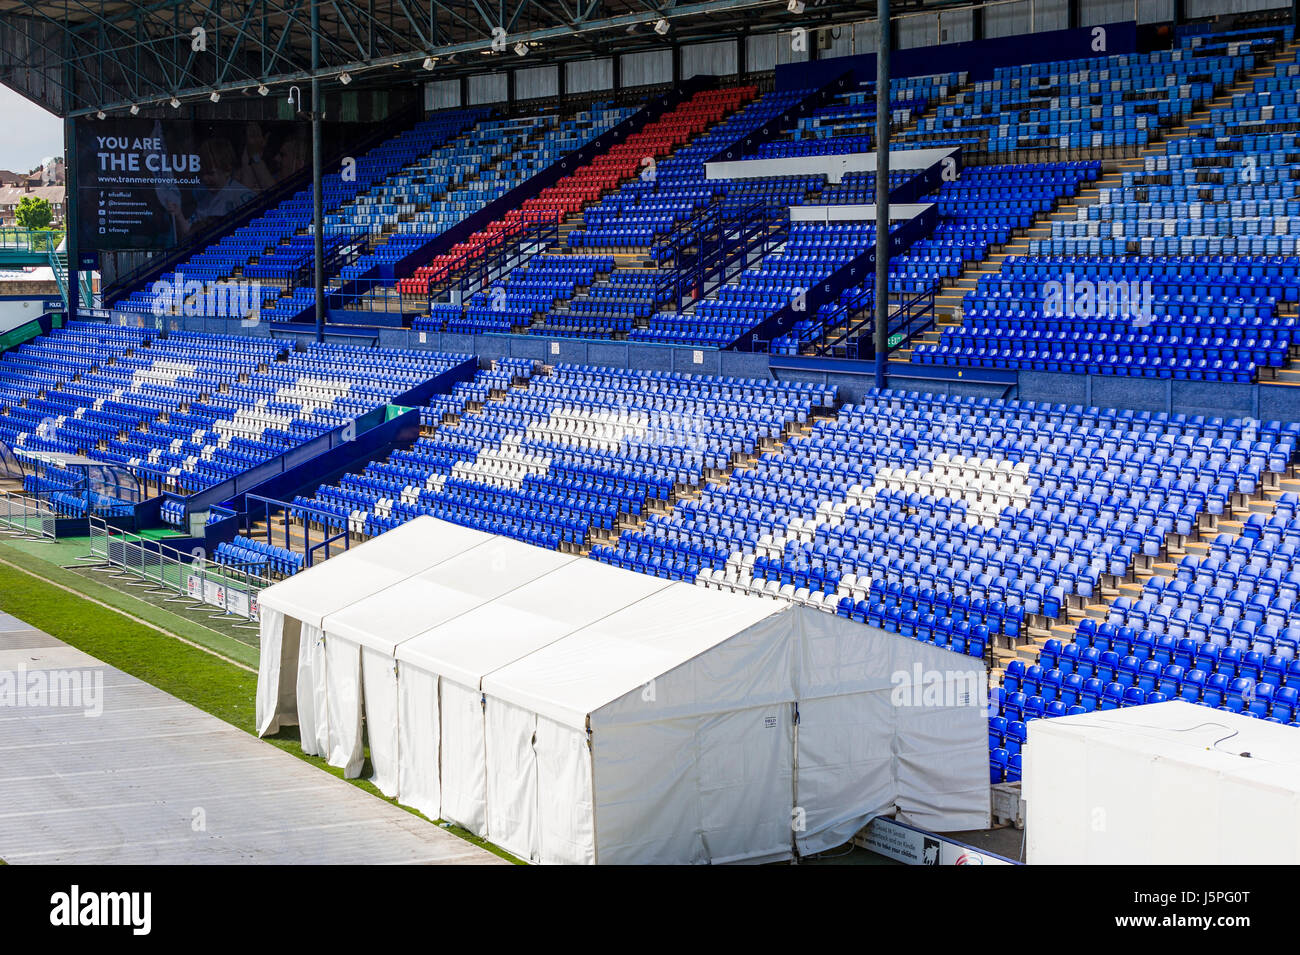 Wirral, UK. 18th May 2017.  Staging is erected and the venue is prepared ready for the huge Wirral Live concerts being held this weekend at the Tranmere Rovers football ground, Prenton Park, in Wirral.  The stage is now nearly completed, and artists green room and hospitality are being prepared.  Wirral Live is a 3 day concert; the conert is being headlined by Madness on Friday, The Libertines on Saturday, and Little Mix on Sunday.  Supporting artists are Courts, The Rhythm Method, The Farm, The Humingbirds, The Coral, Anton Powers, Bronnie, Mic Lowry and Conor Maynard. © Paul Warburton Stock Photo